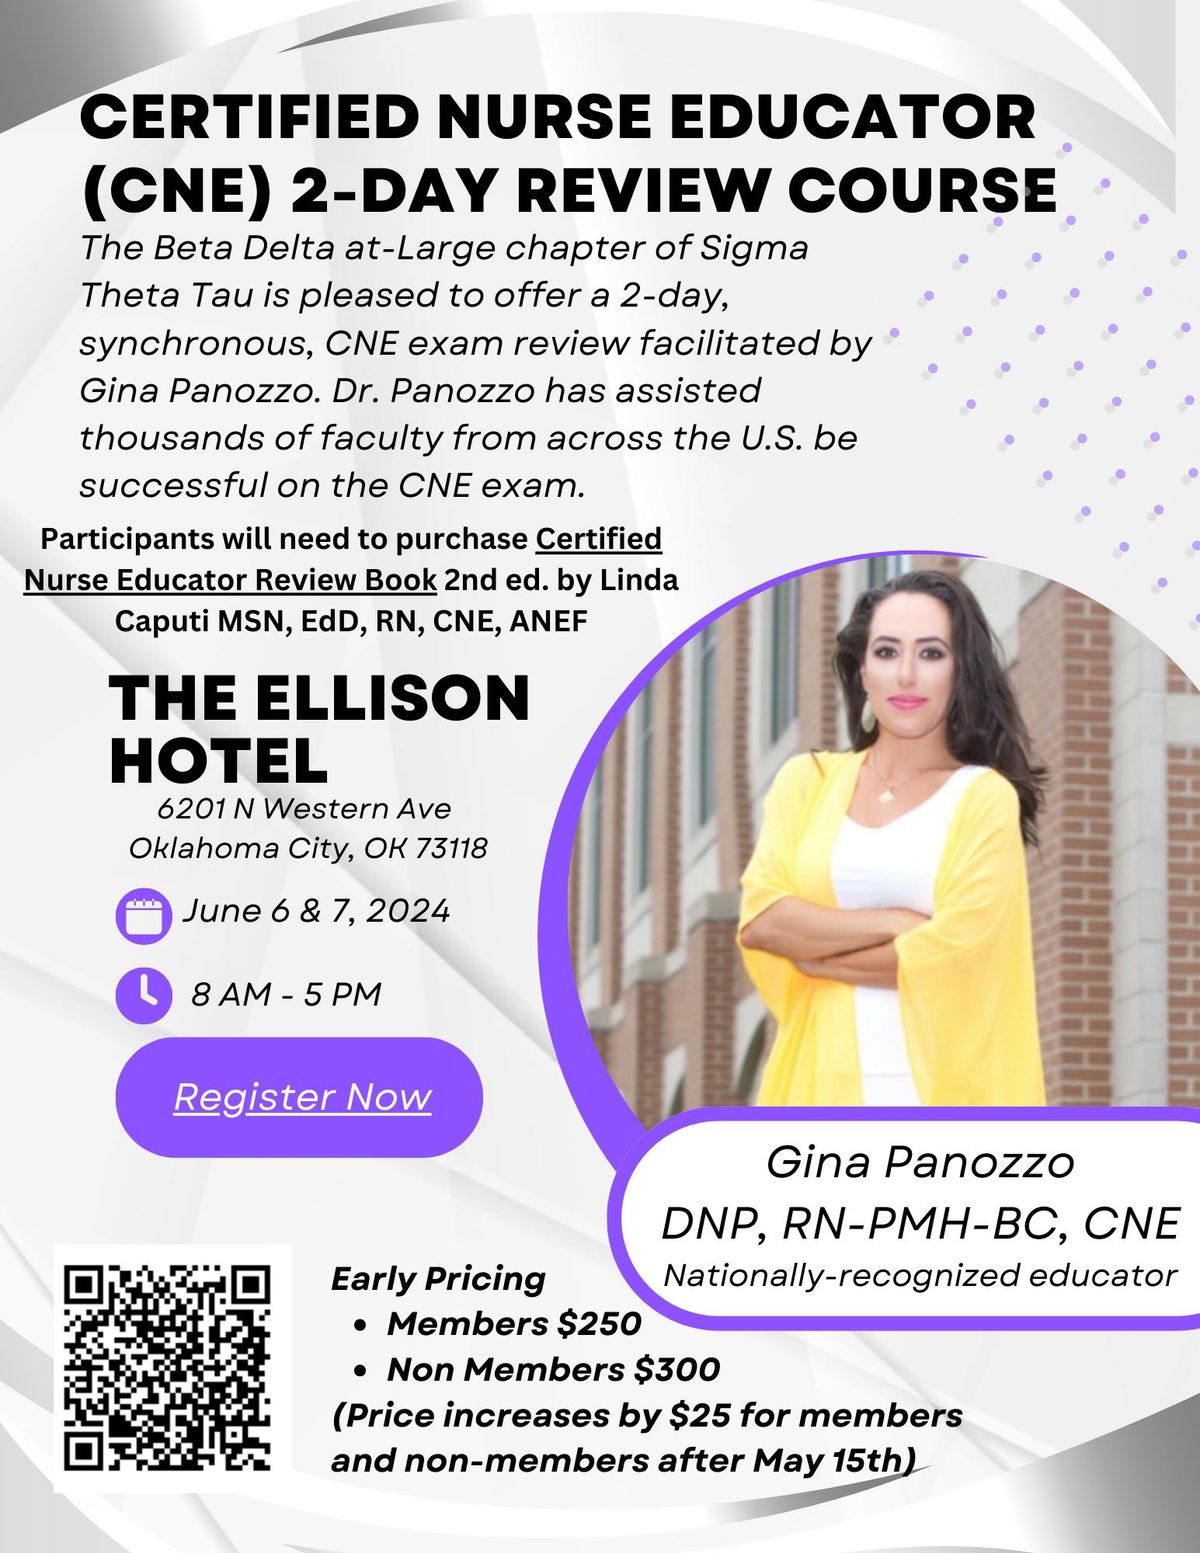 2-Day CNE Review Course with Gina Panozzo